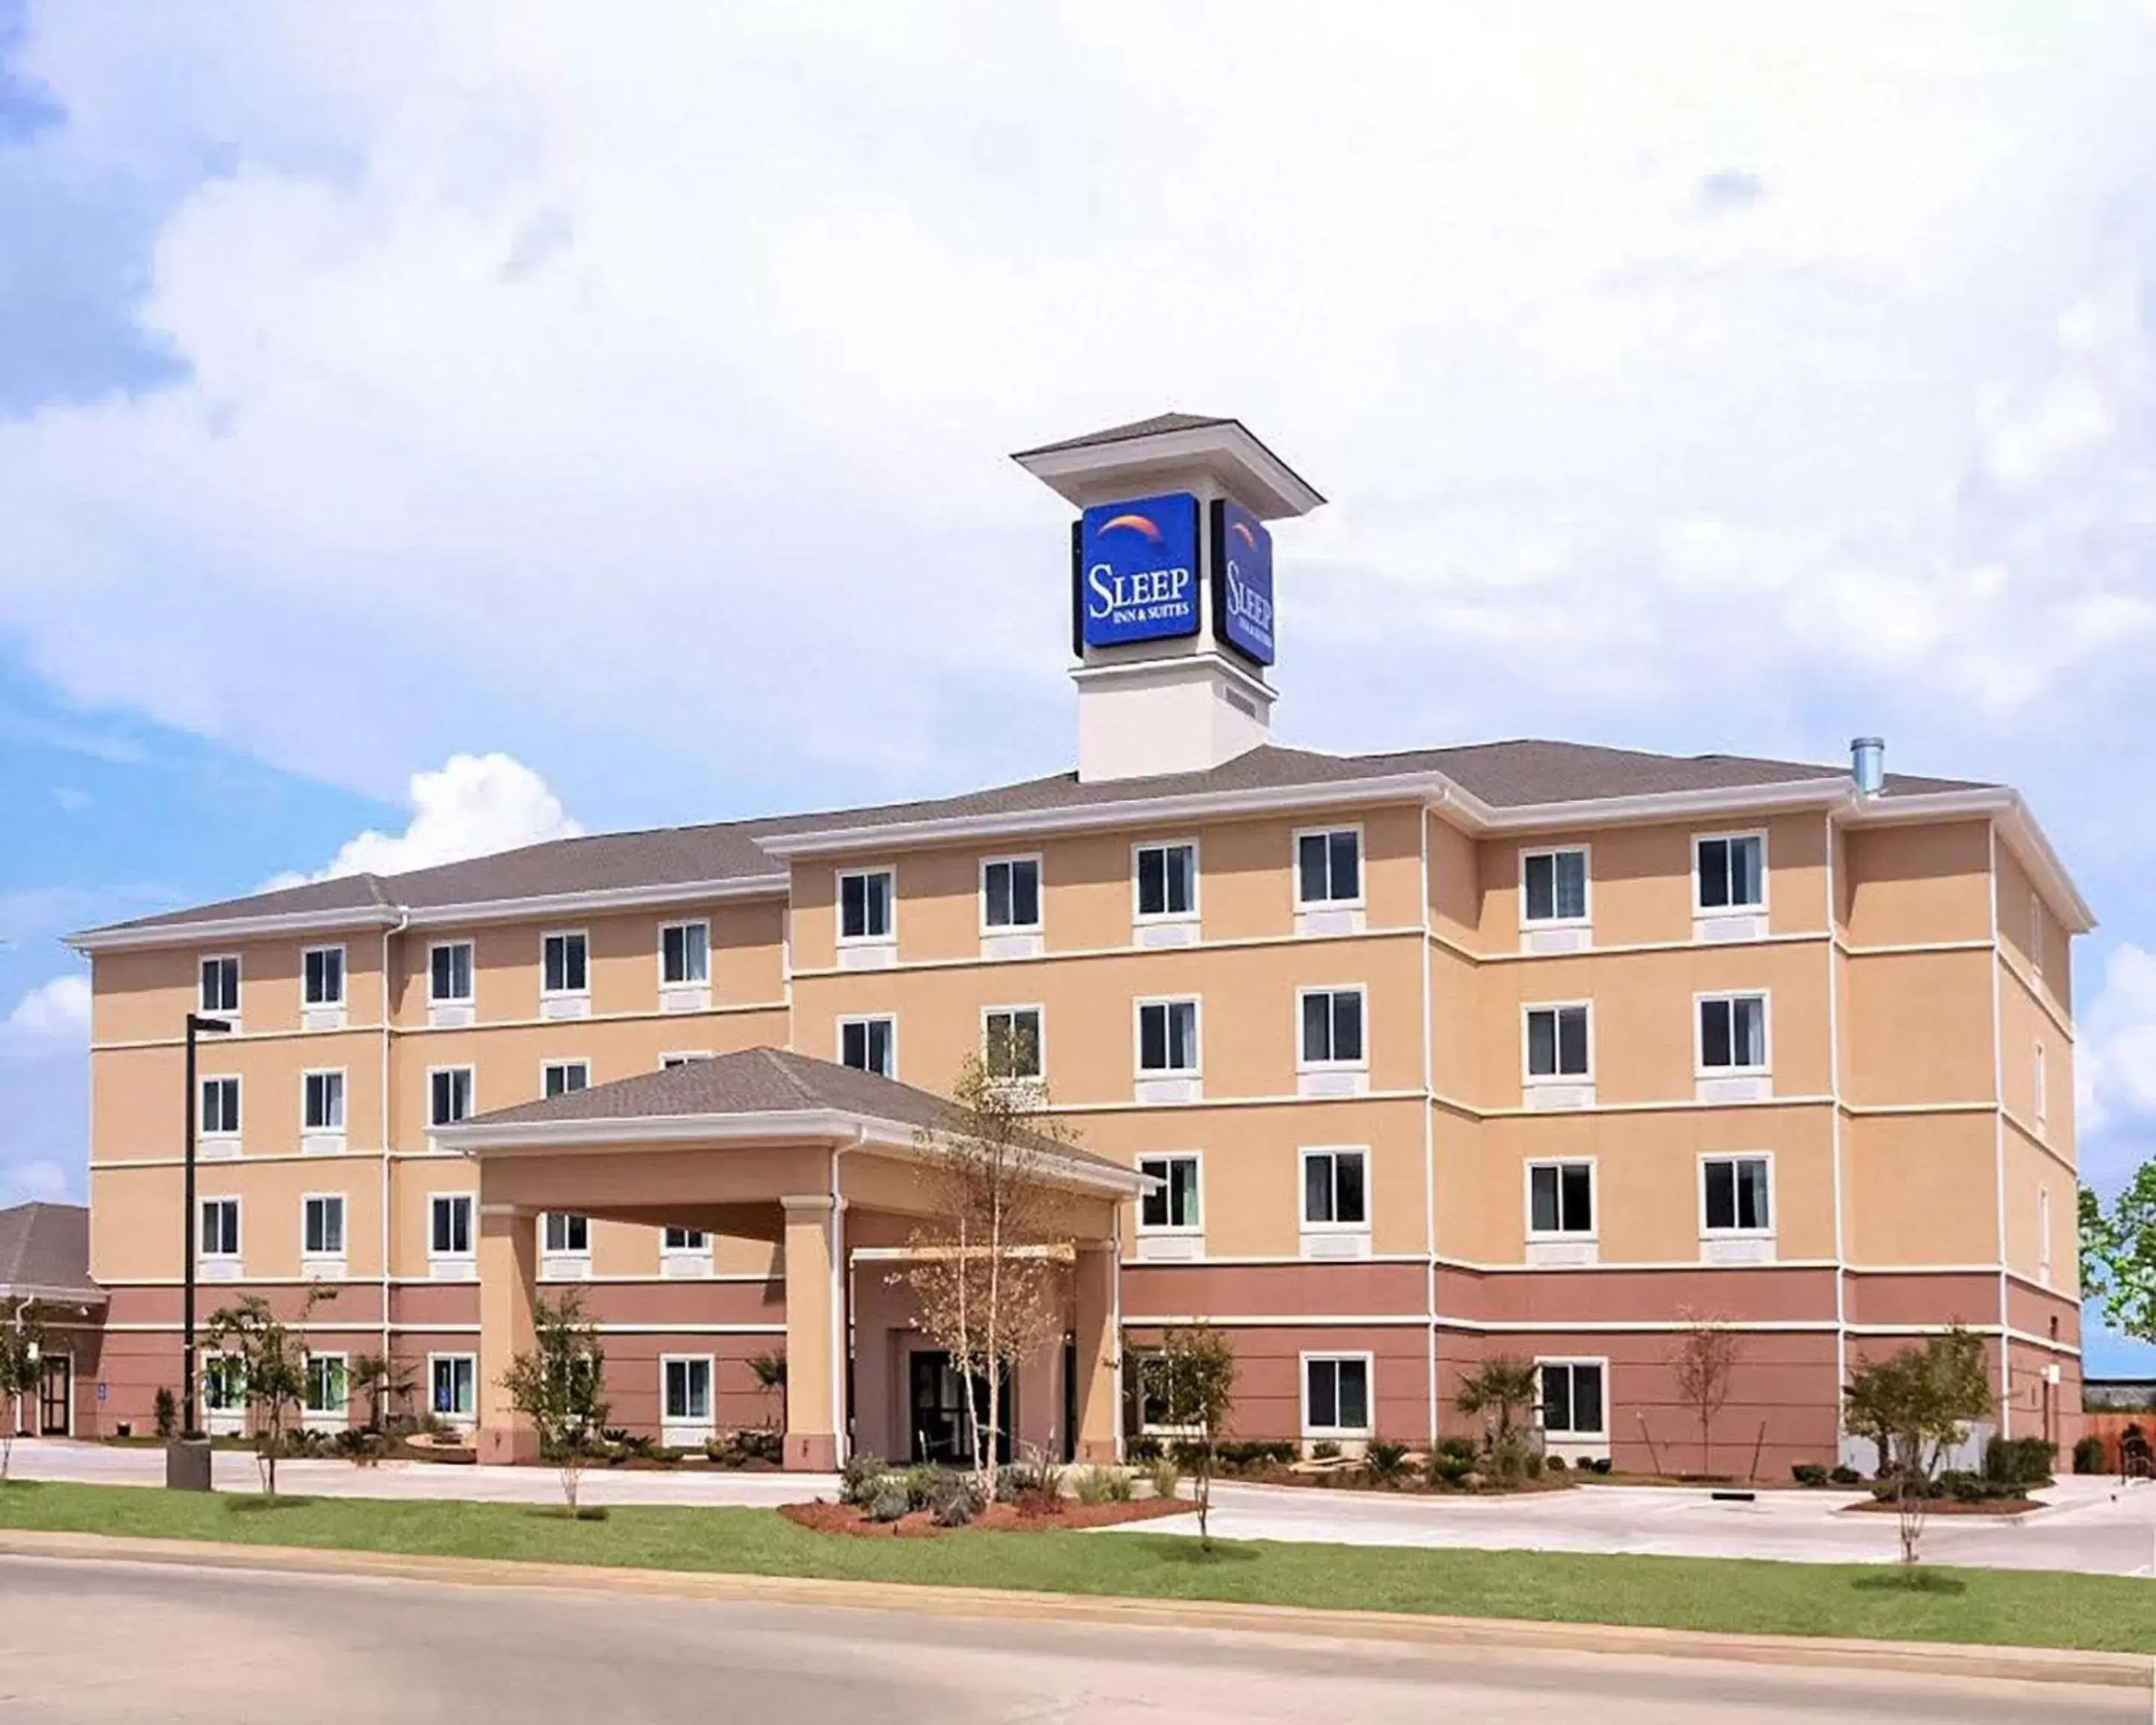 Property Building in Sleep Inn and Suites near Mall & Medical Center